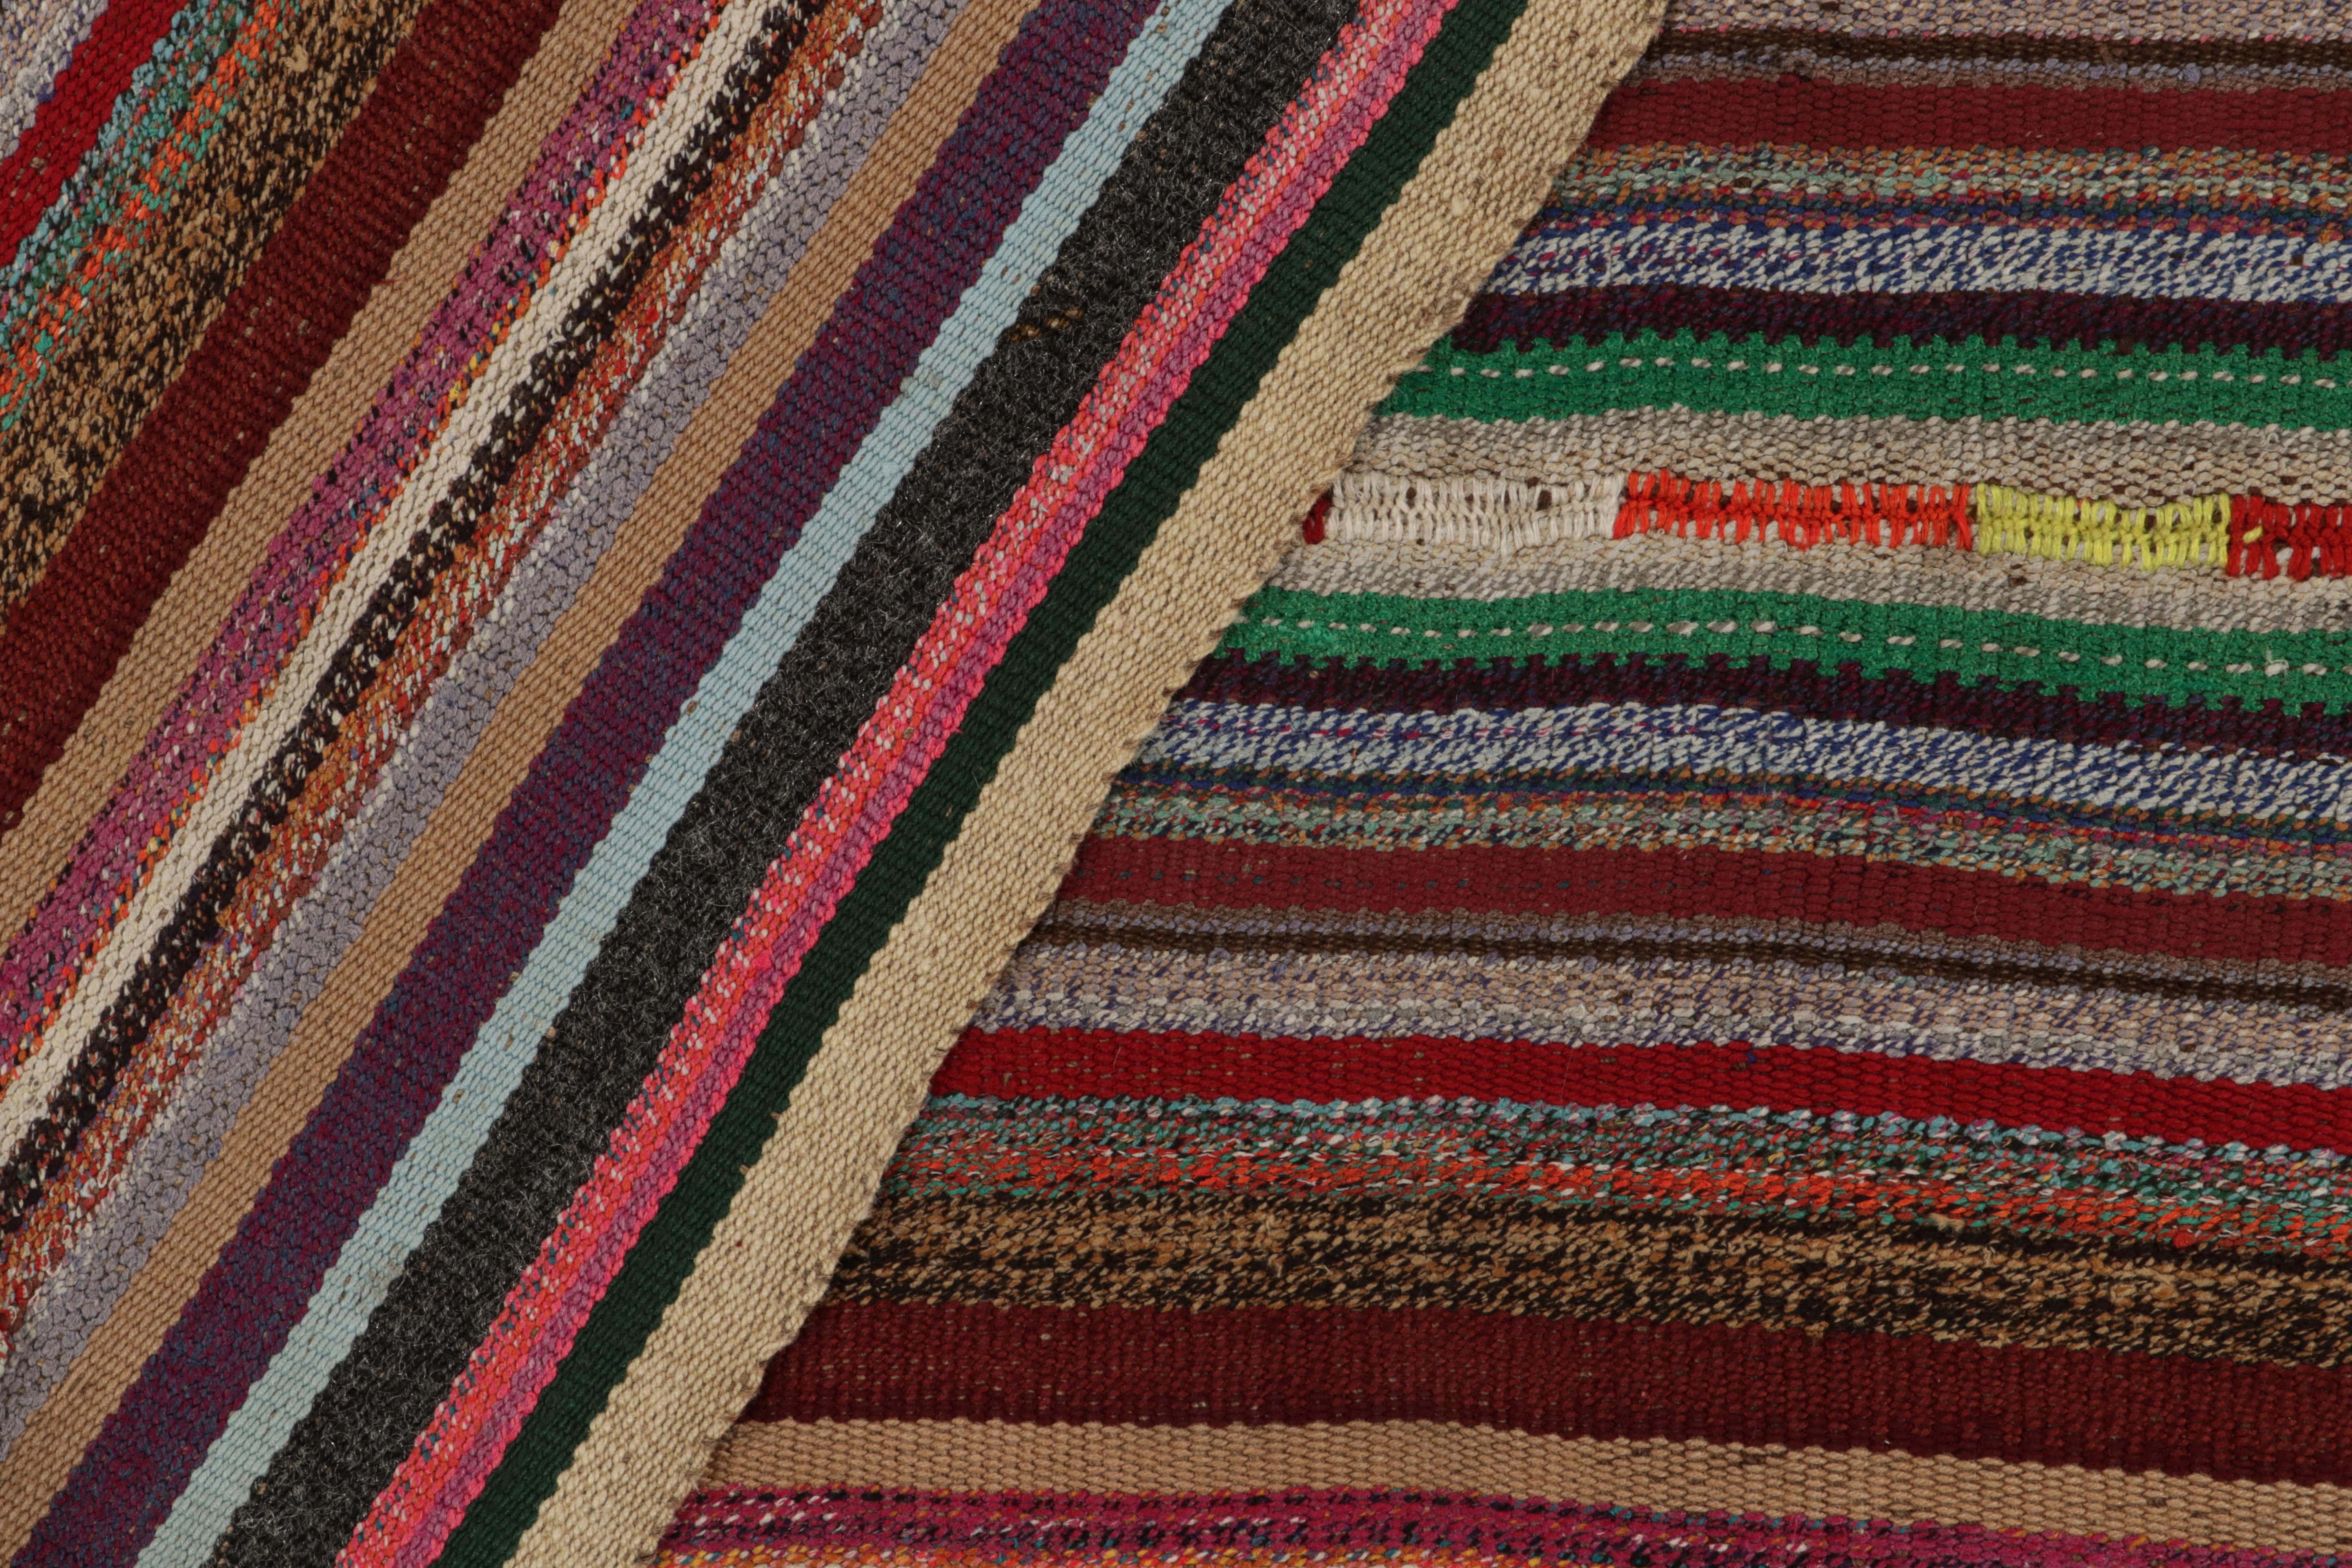 1950s Vintage Chaput Kilim in Multicolor Stripe Patterns by Rug & Kilim In Good Condition For Sale In Long Island City, NY